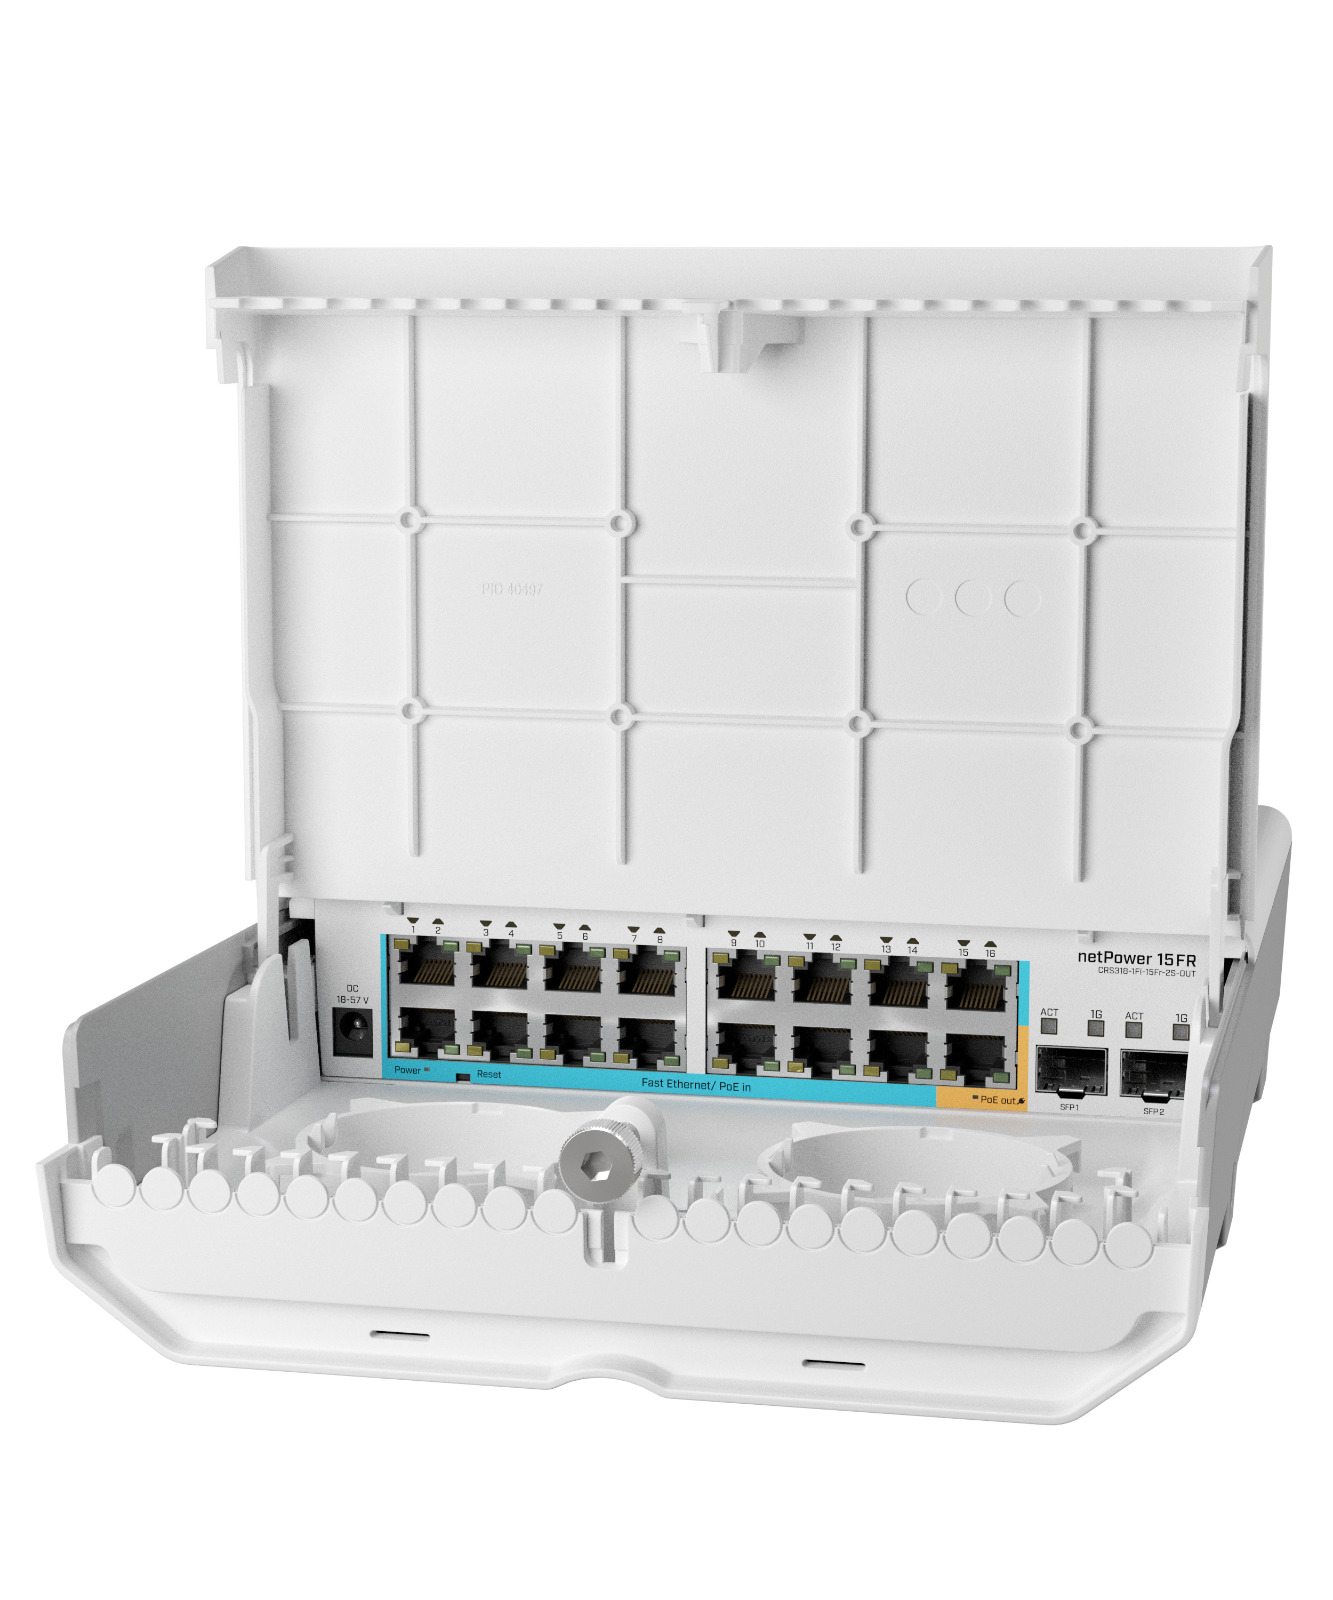 MikroTik netPower 15FR outdoor 18 port switch with 15 reverse PoE ports and SFP